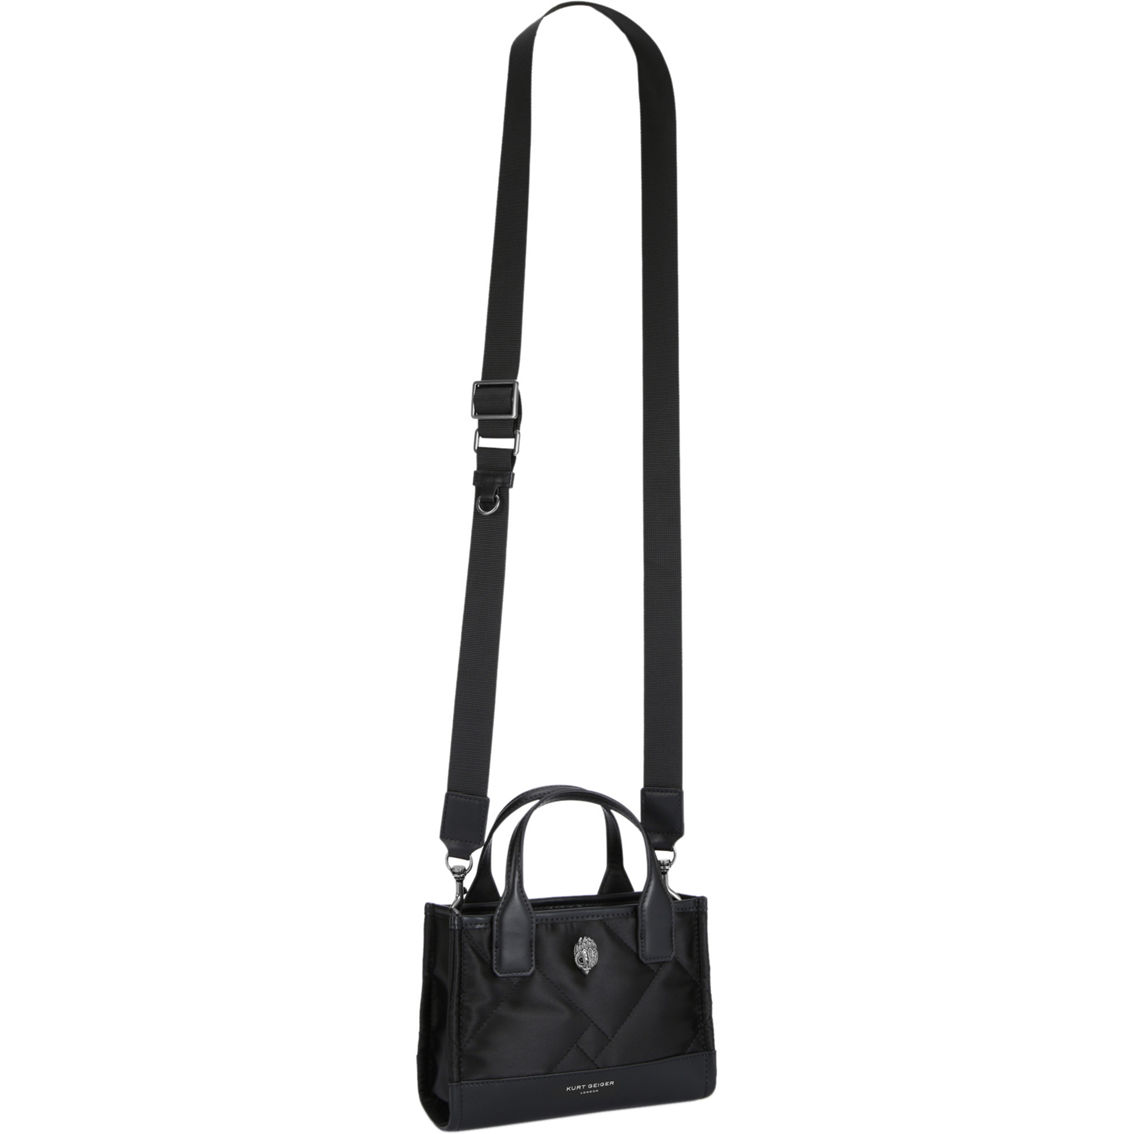 Kurt Geiger Extra Small Recycled Square Shopper, Black - Image 2 of 6